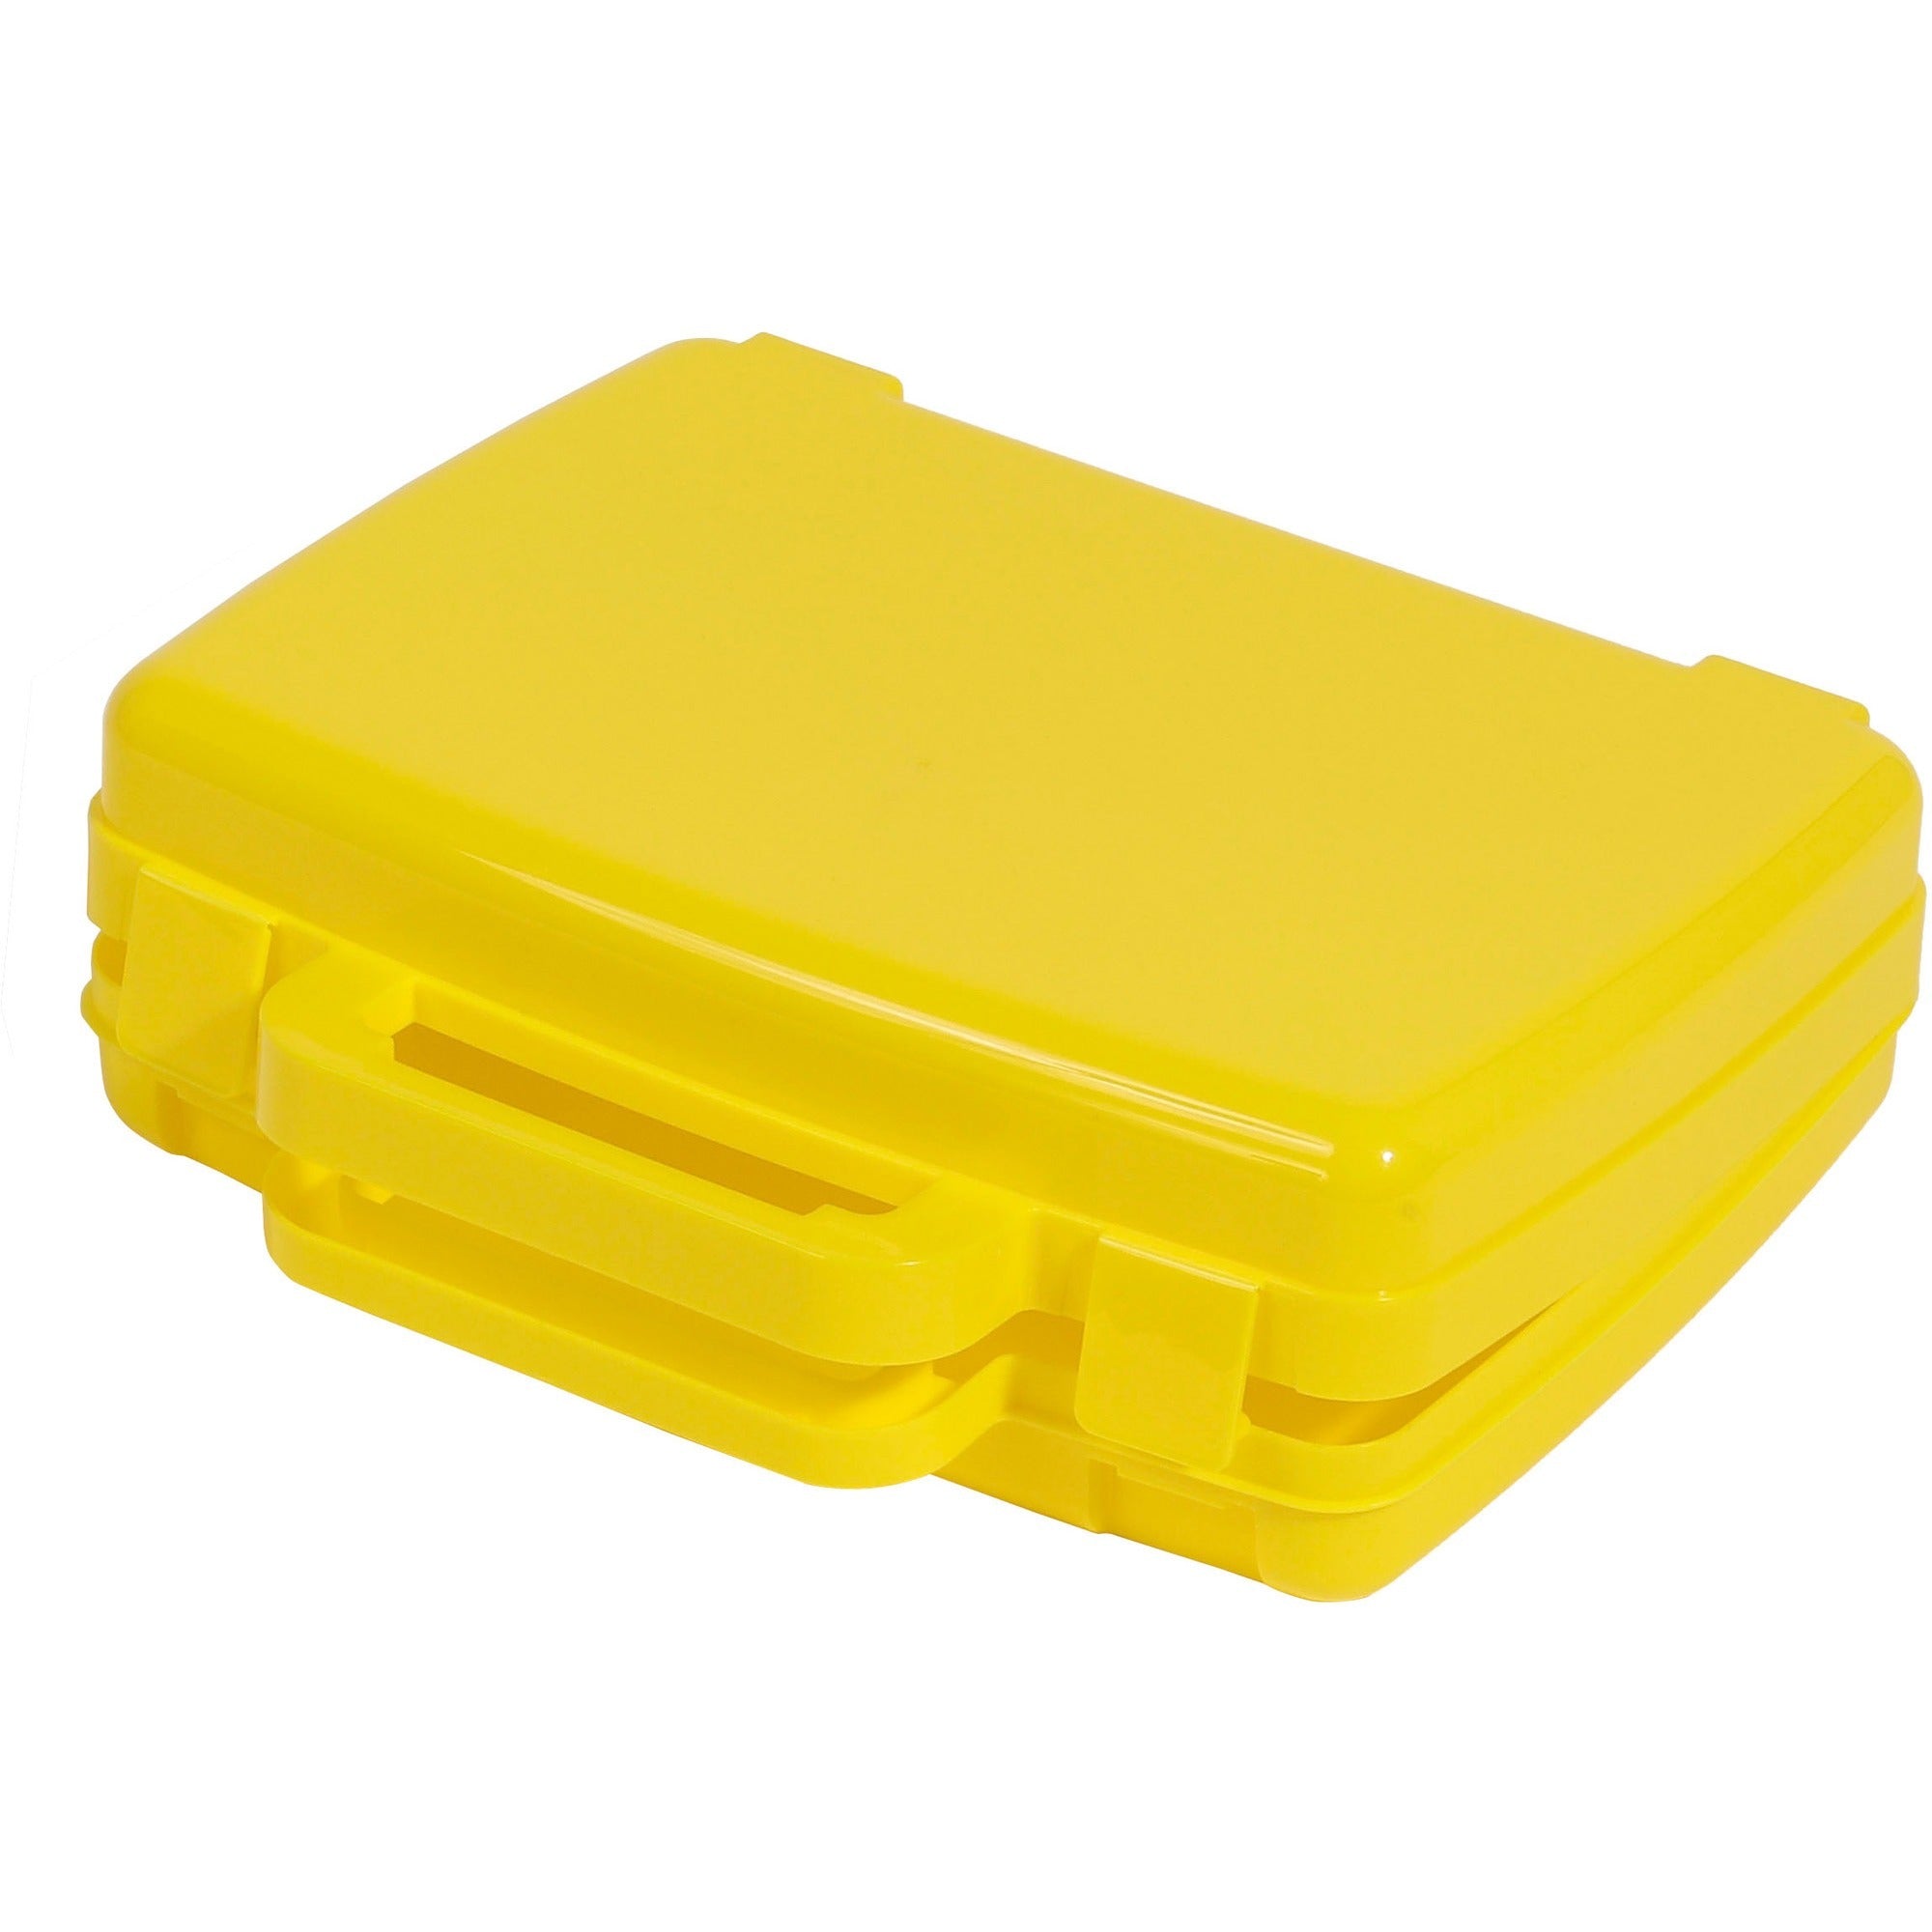 deflecto-antimicrobial-storage-case-yellow-external-dimensions-86-width-x-102-depth-x-27-height-snap-tight-closure-plastic-yellow-for-photo-art-craft-supplies_def39506yel - 3